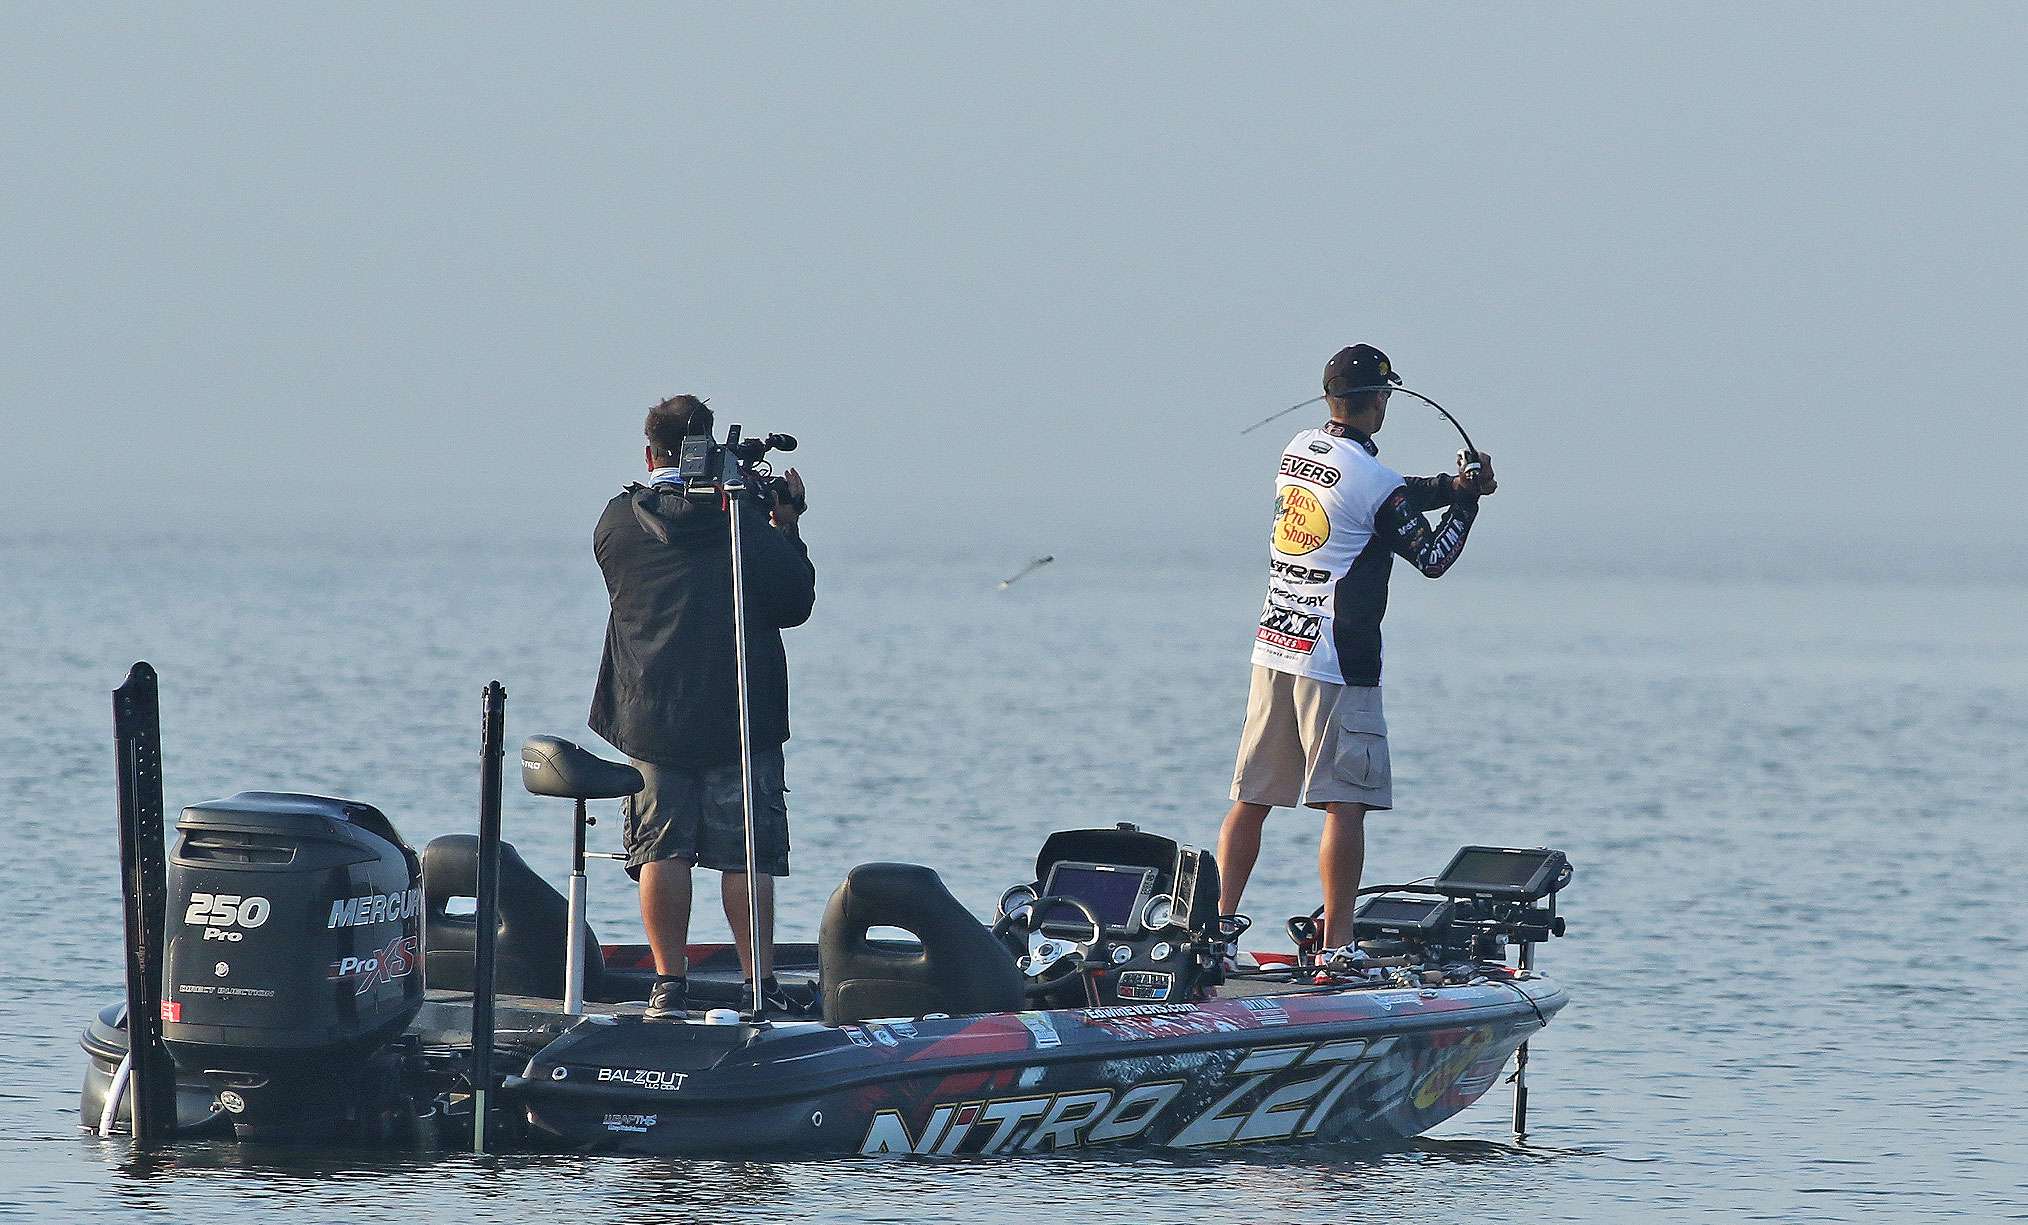 He began the day in the lead of the event with 51 pounds, 2 ounces.